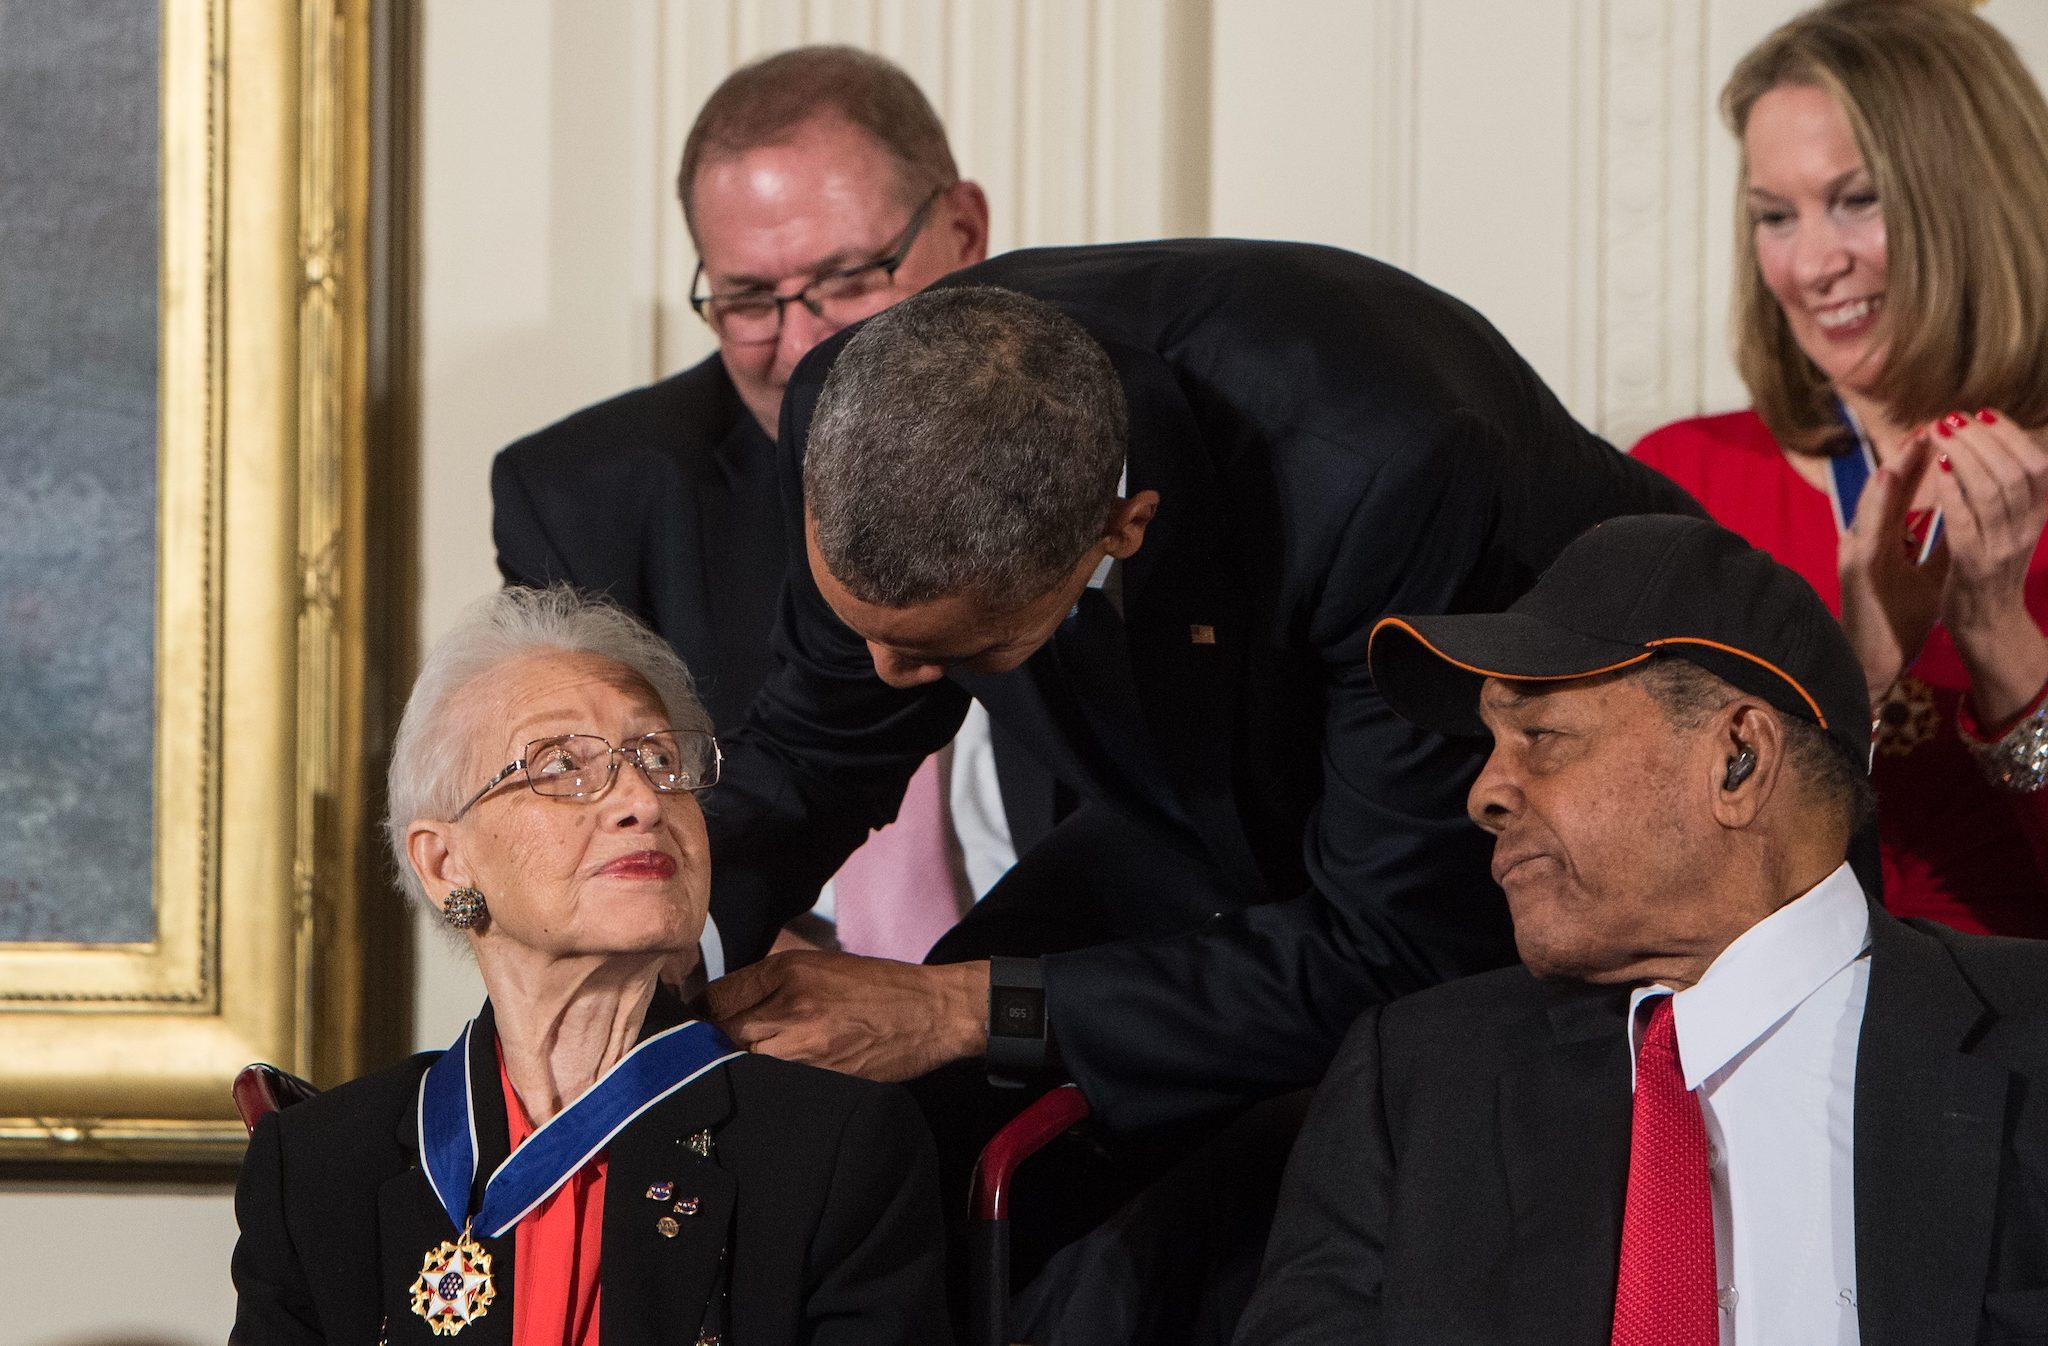 Space ace: Johnson receives the Presidential Medal of Freedom from Barack Obama at the White House in 2015